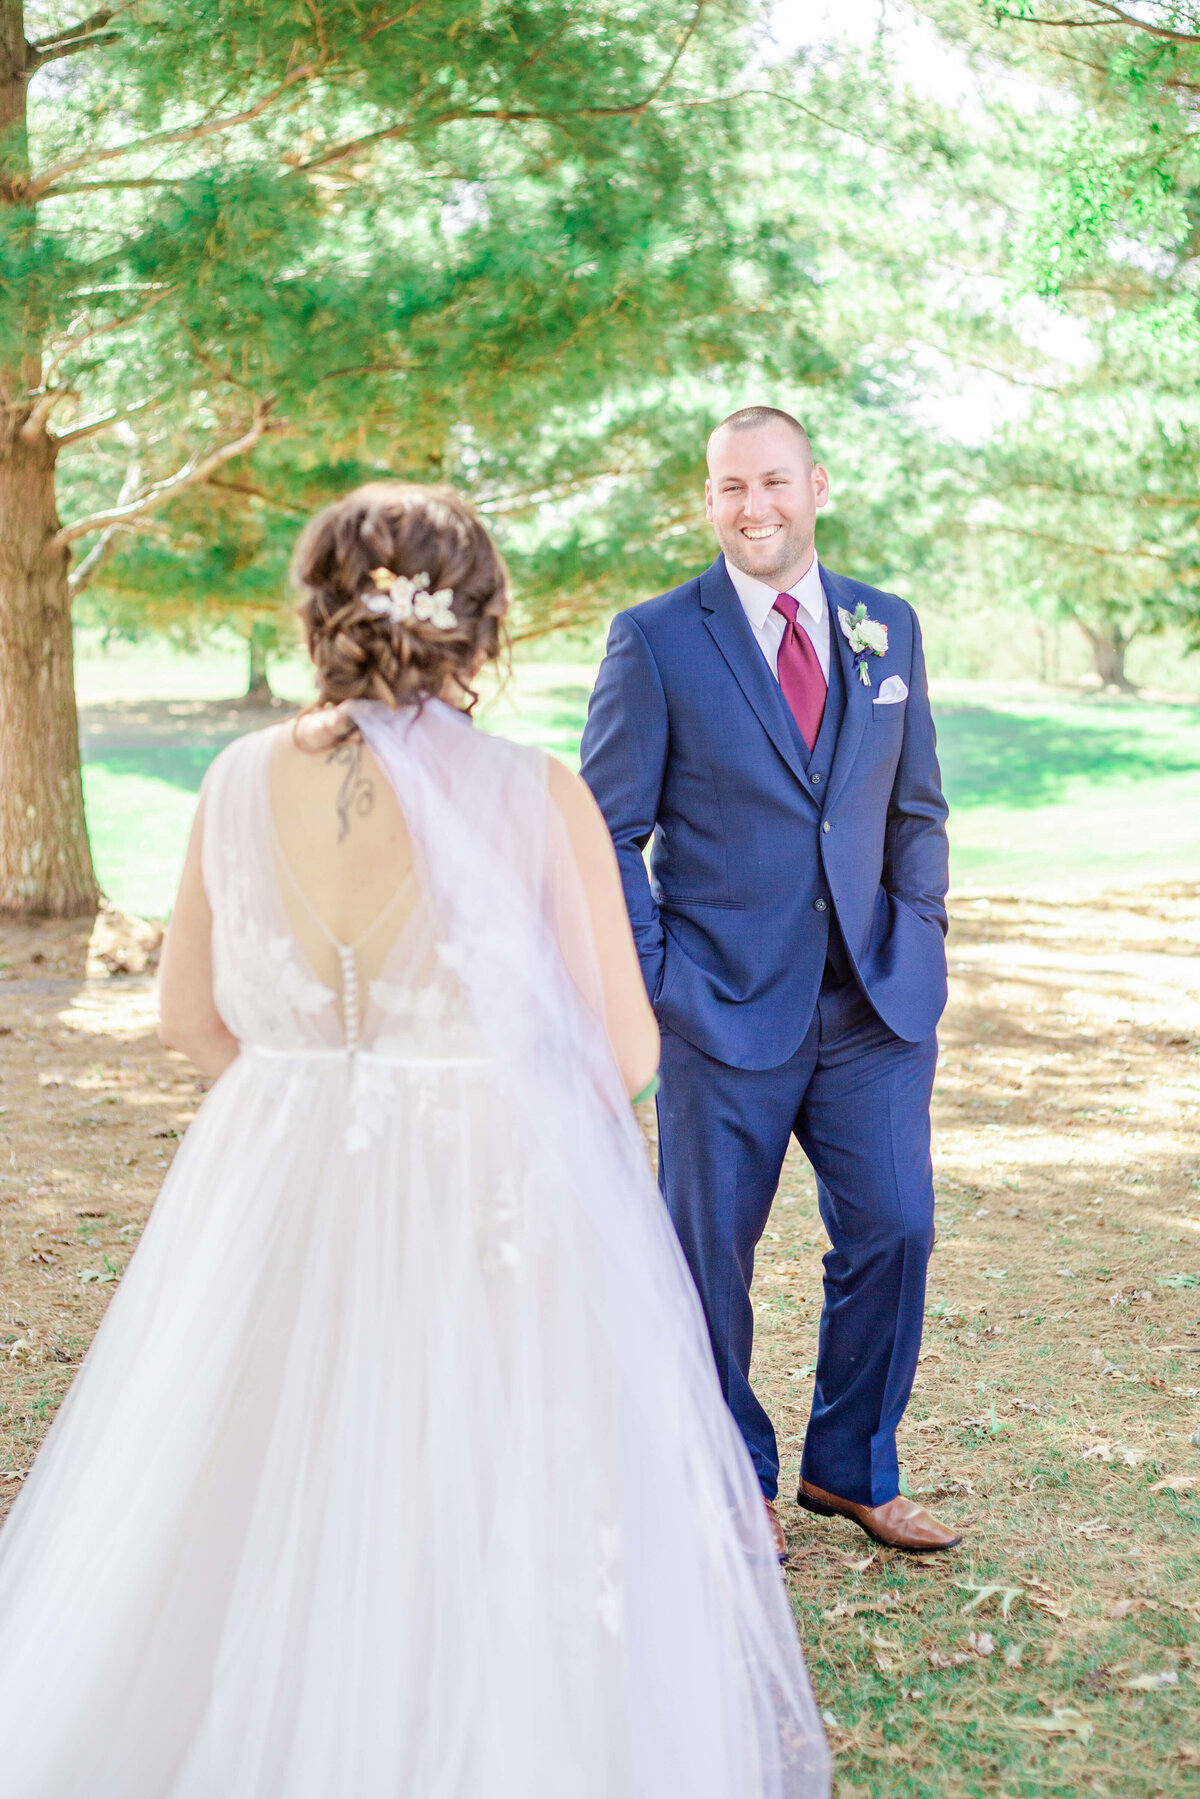 Bride-and-Groom-pose-for-outdoor-wedding-photos-by-Bethany-Lane-Photography-5